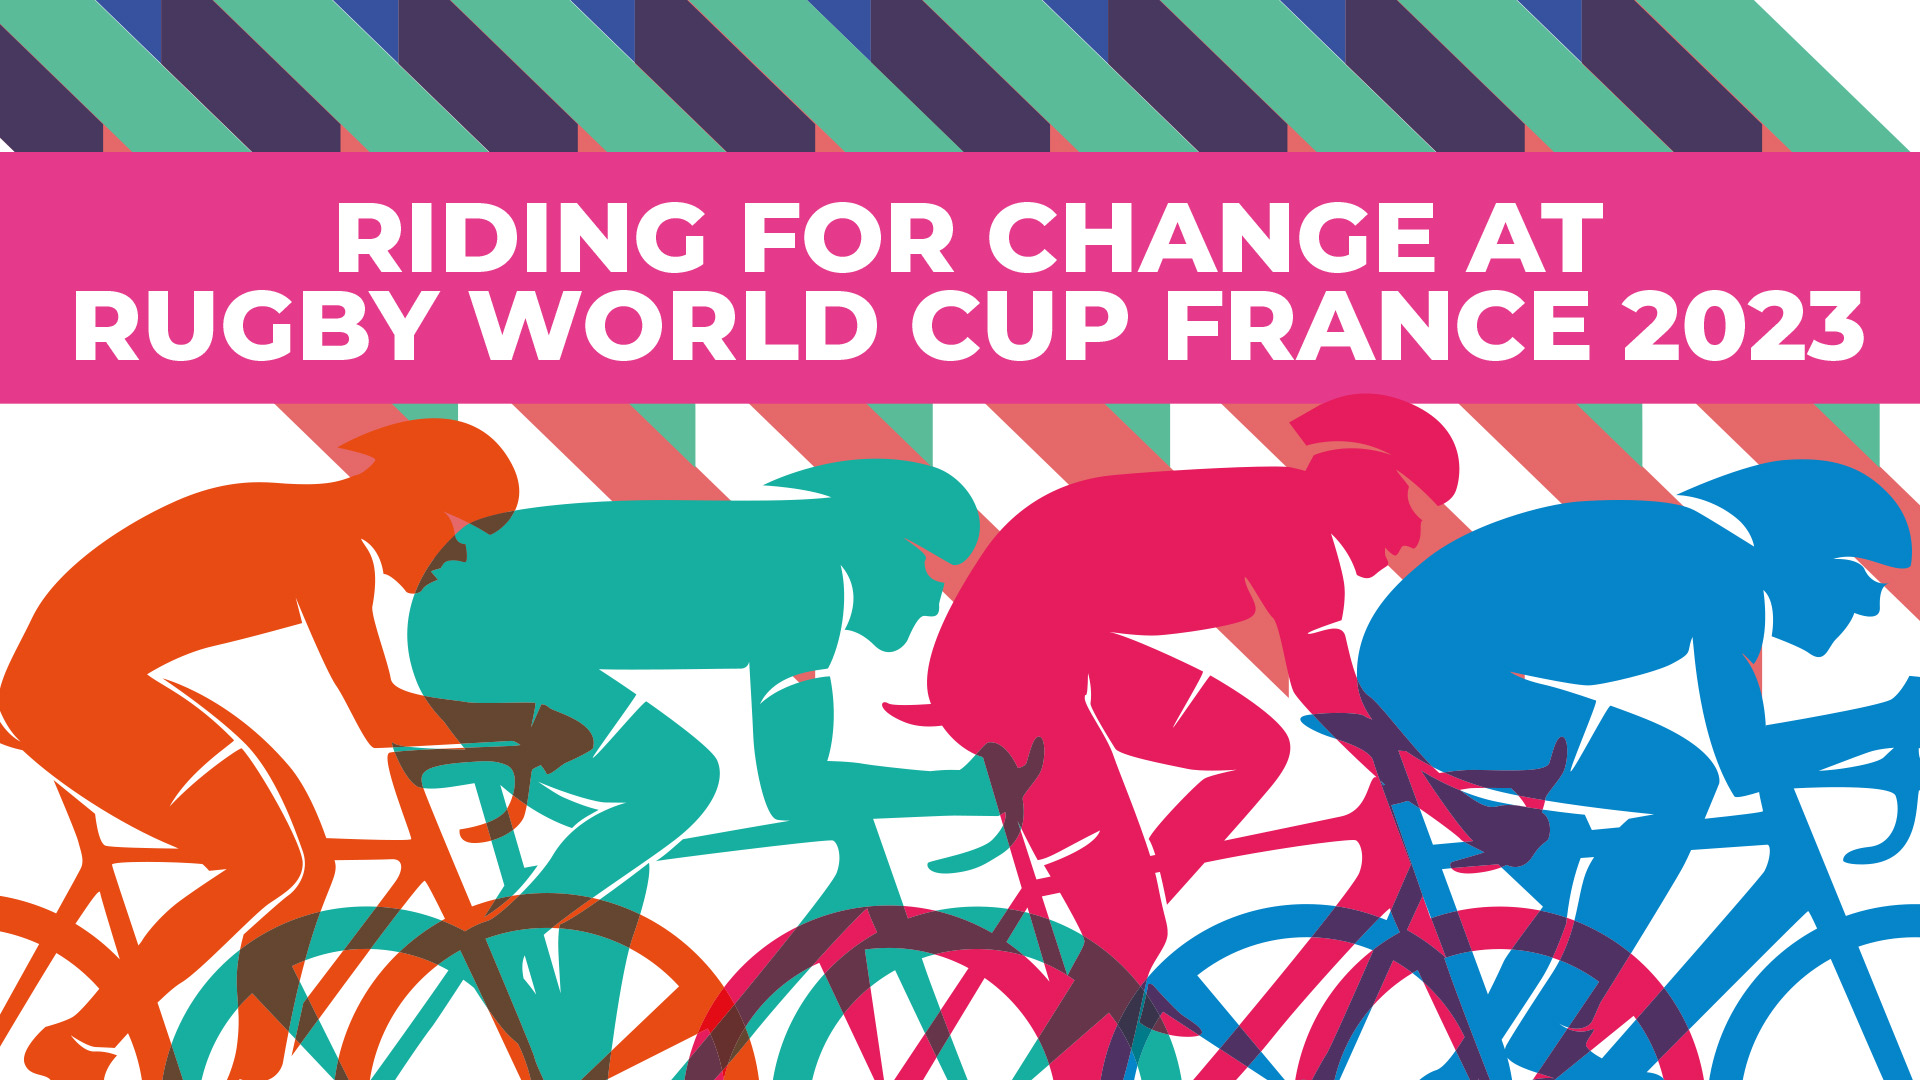 MSG Tours Launches Head for Lyon Campaign: Riding for Change in the Rugby World!